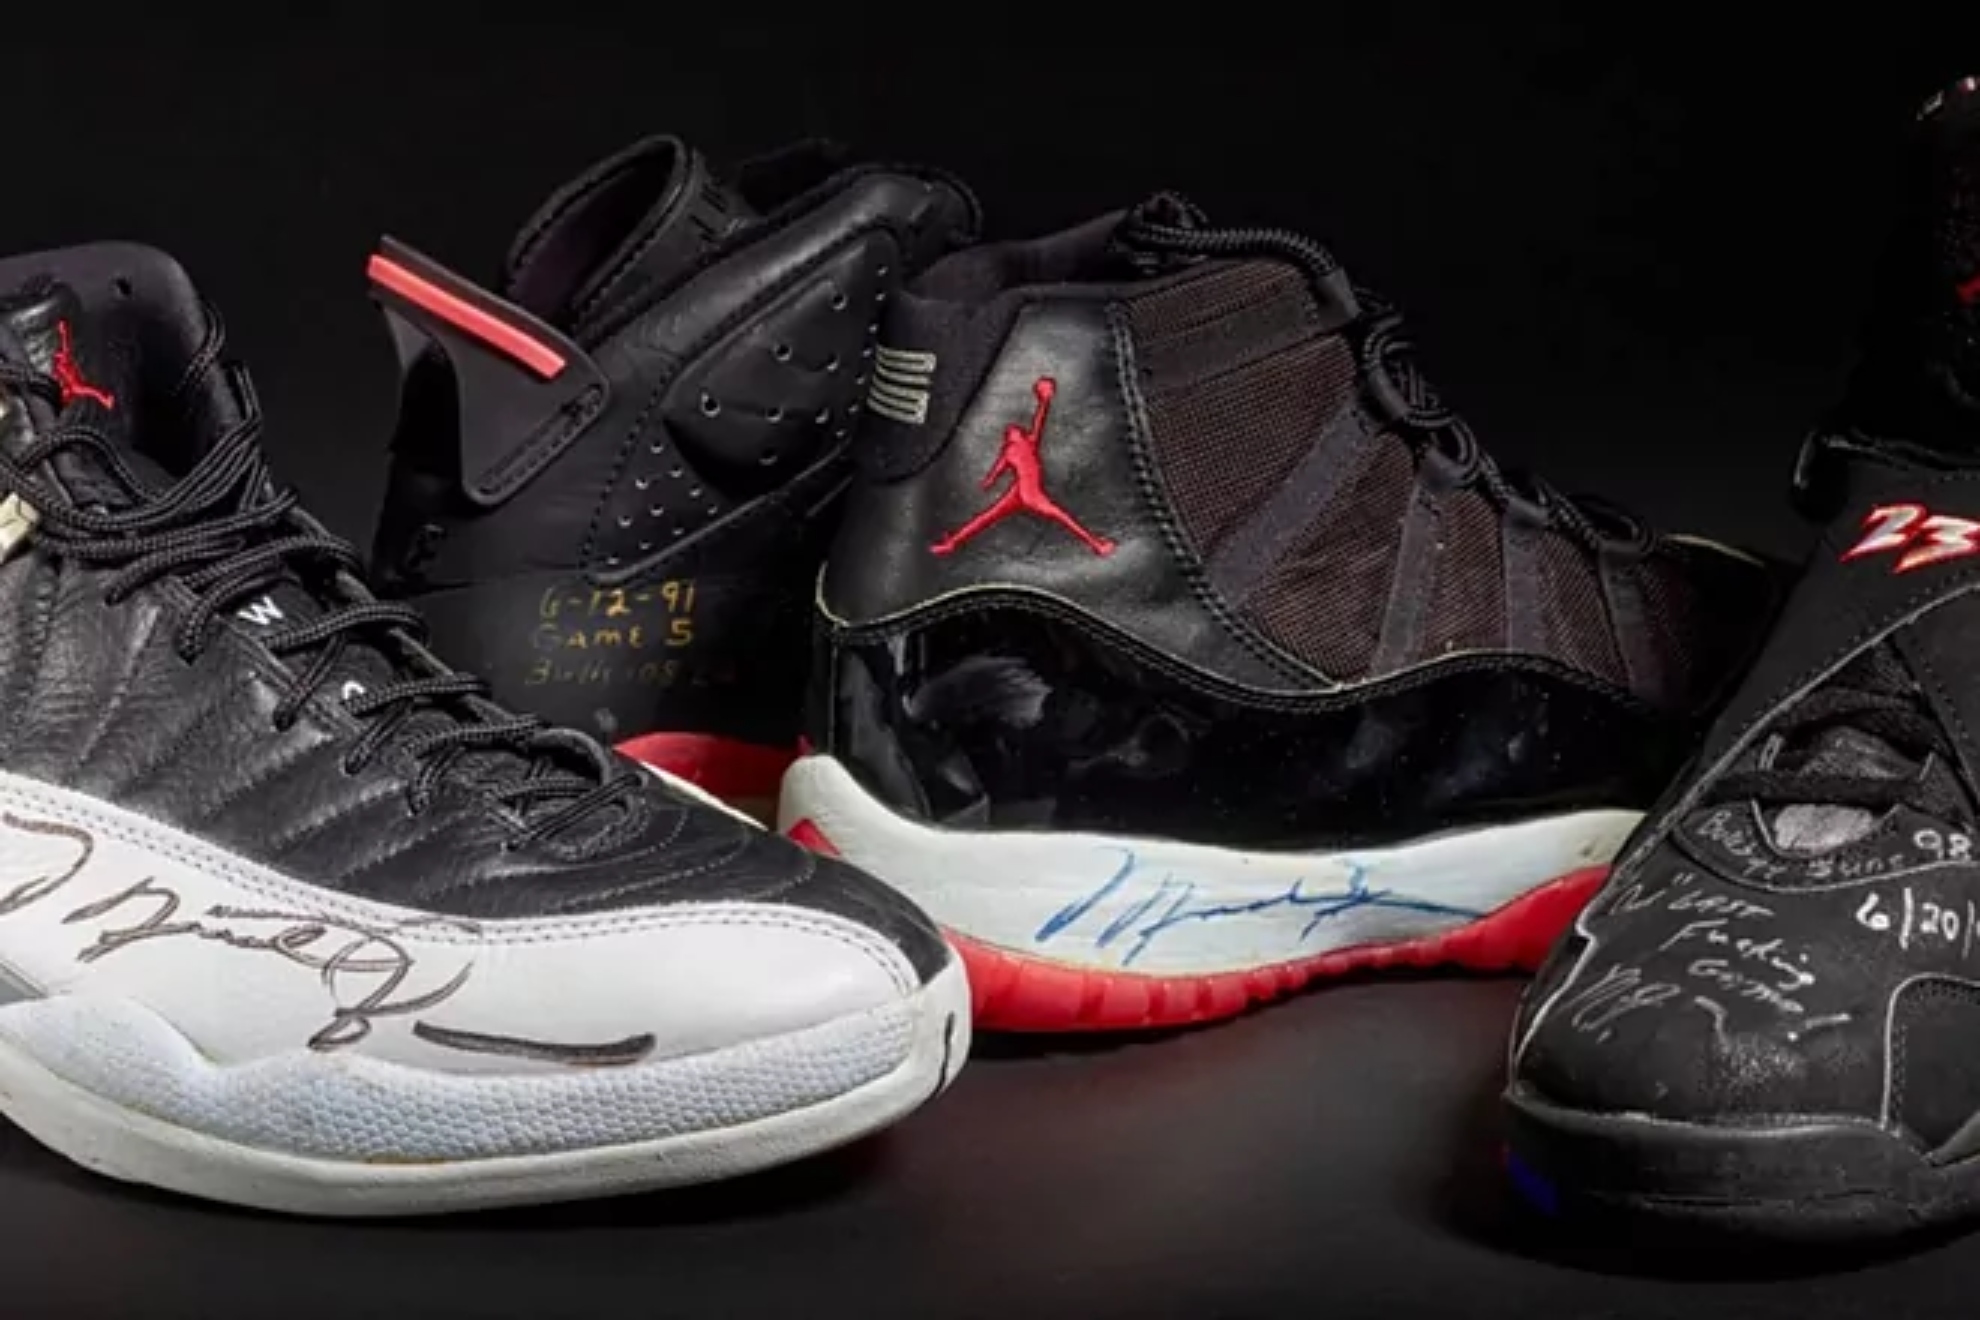 Michael Jordans championship-winning shoes sold at auction: What was the winning bid?